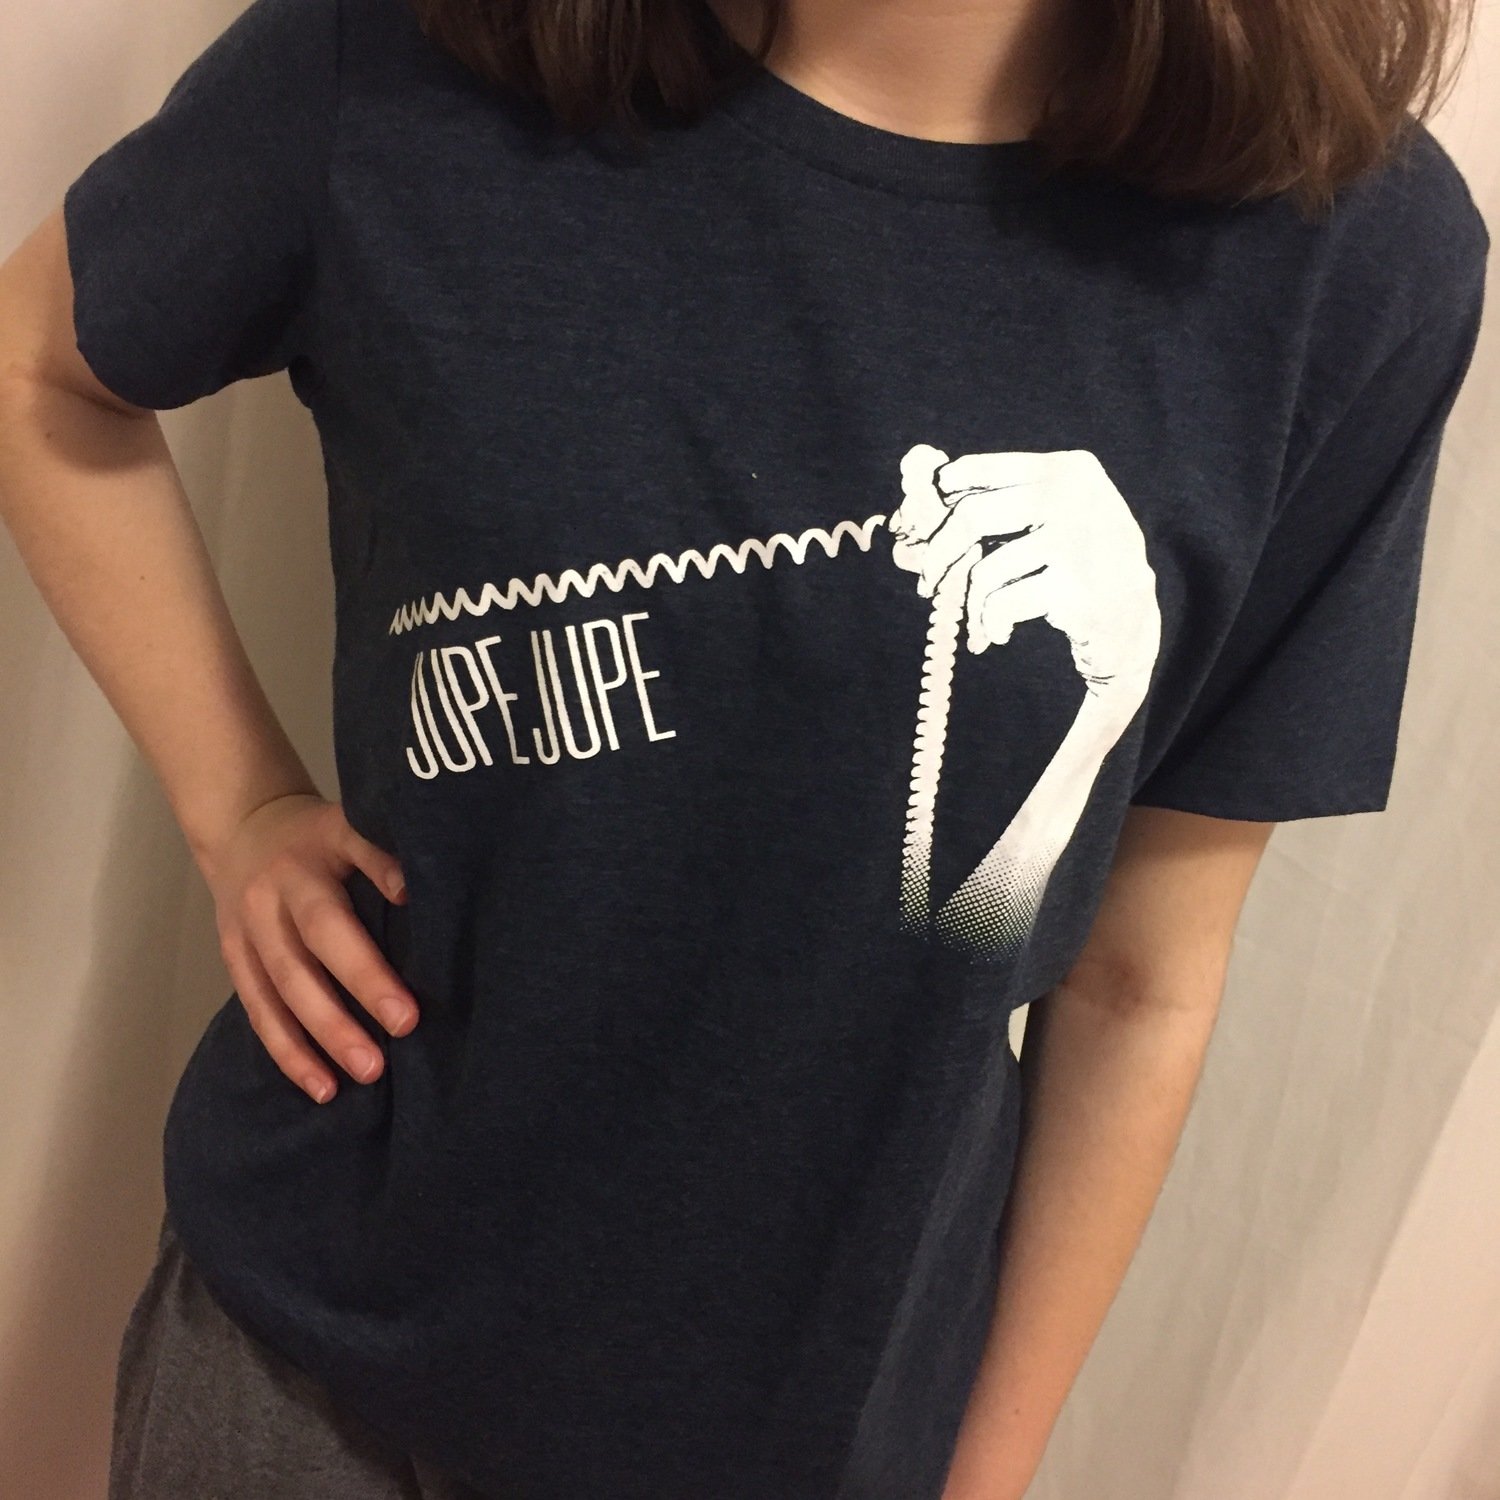 Jupe Jupe "Phone Cord" T-shirt (limited sizes in stock)